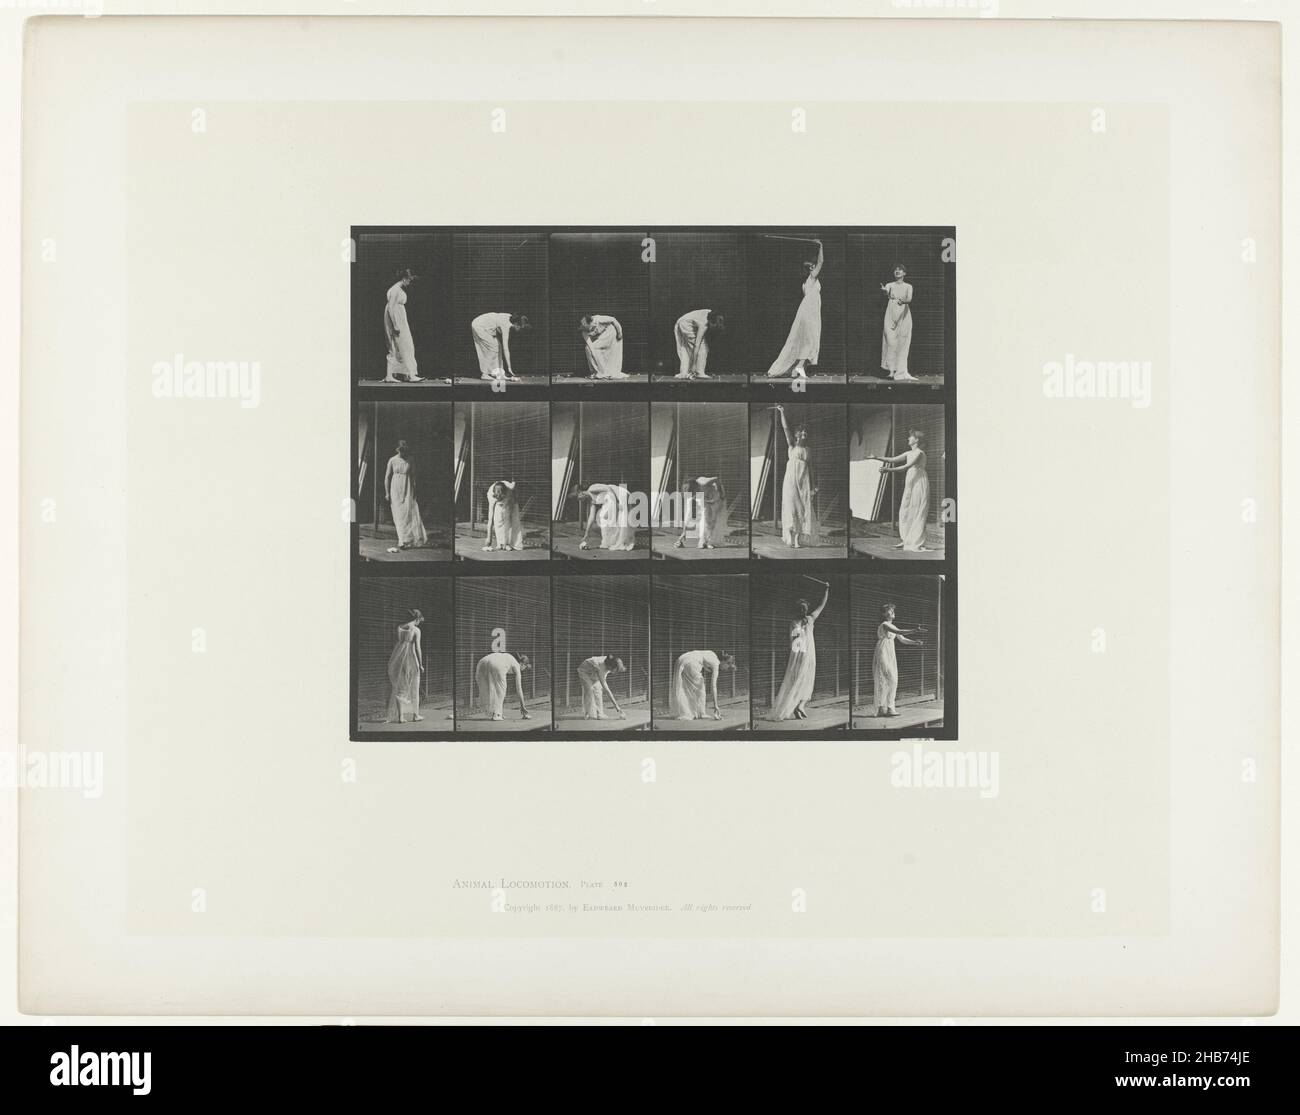 Woman Moving, 'Miscellaneous - stooping, etc', Eadweard Muybridge (mentioned on object), United States of America, 1885 - 1886, paper, collotype, height 483 mm × width 611 mmheight 250 mm × width 295 mm Stock Photo